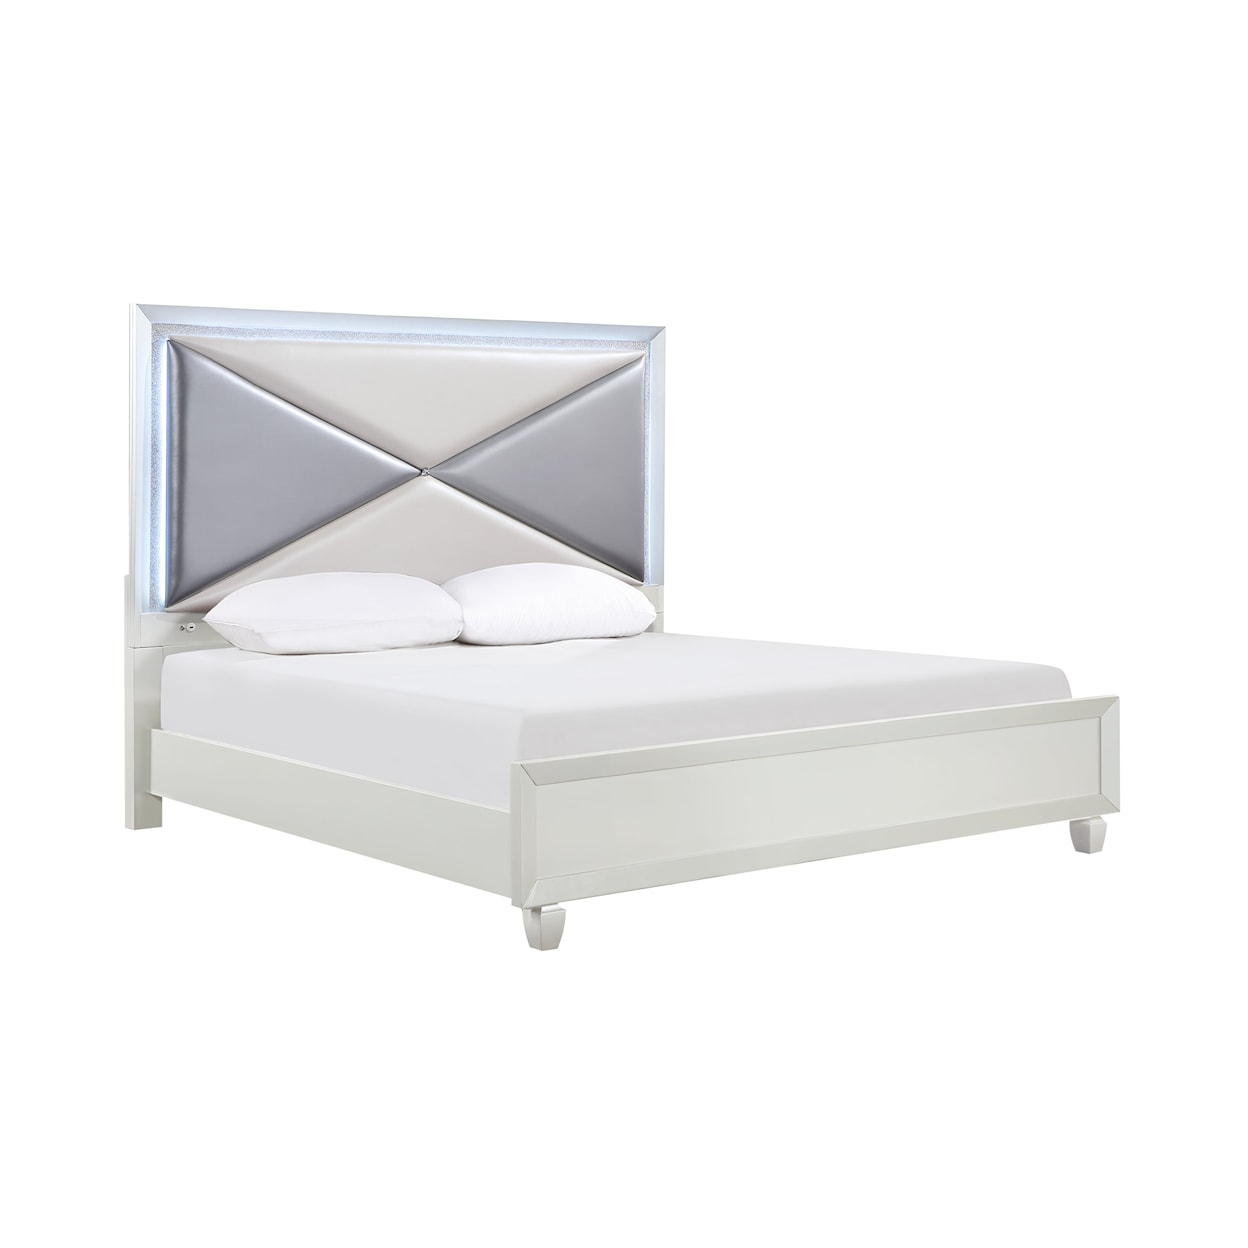 New Classic Furniture Harlequin King Bed